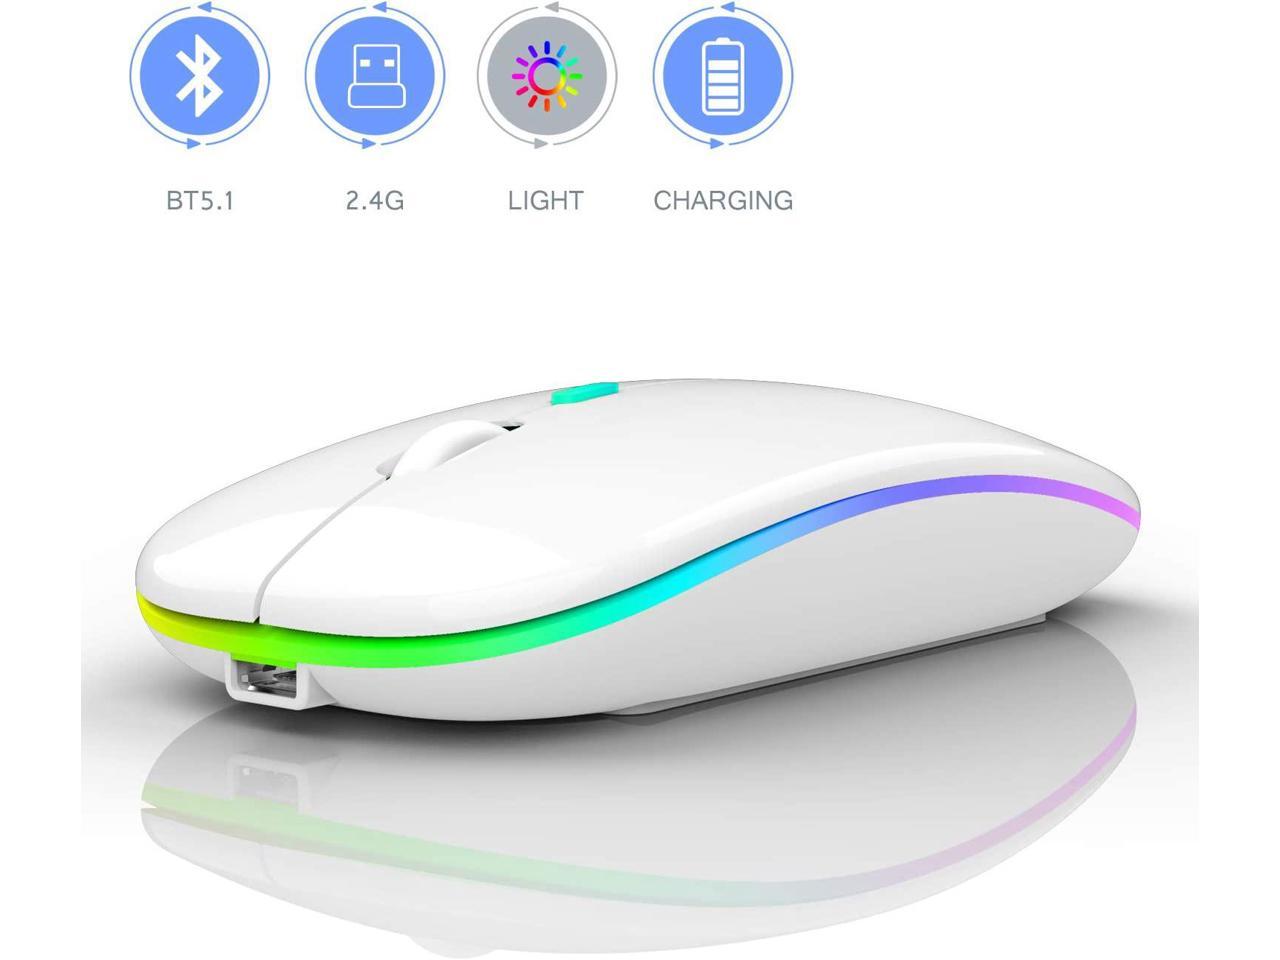 LED Bluetooth Wireless MouseBluetooth Mouse for MacBook ProBluetooth